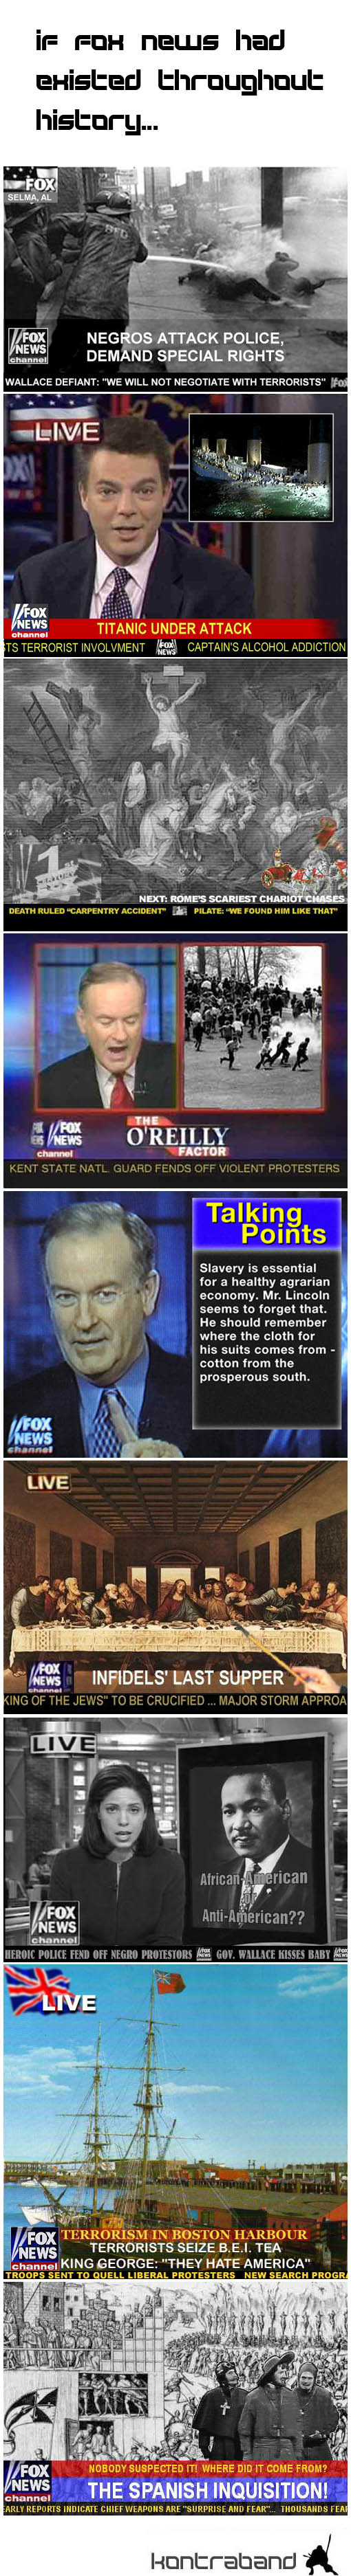 if fox news existed throughout history